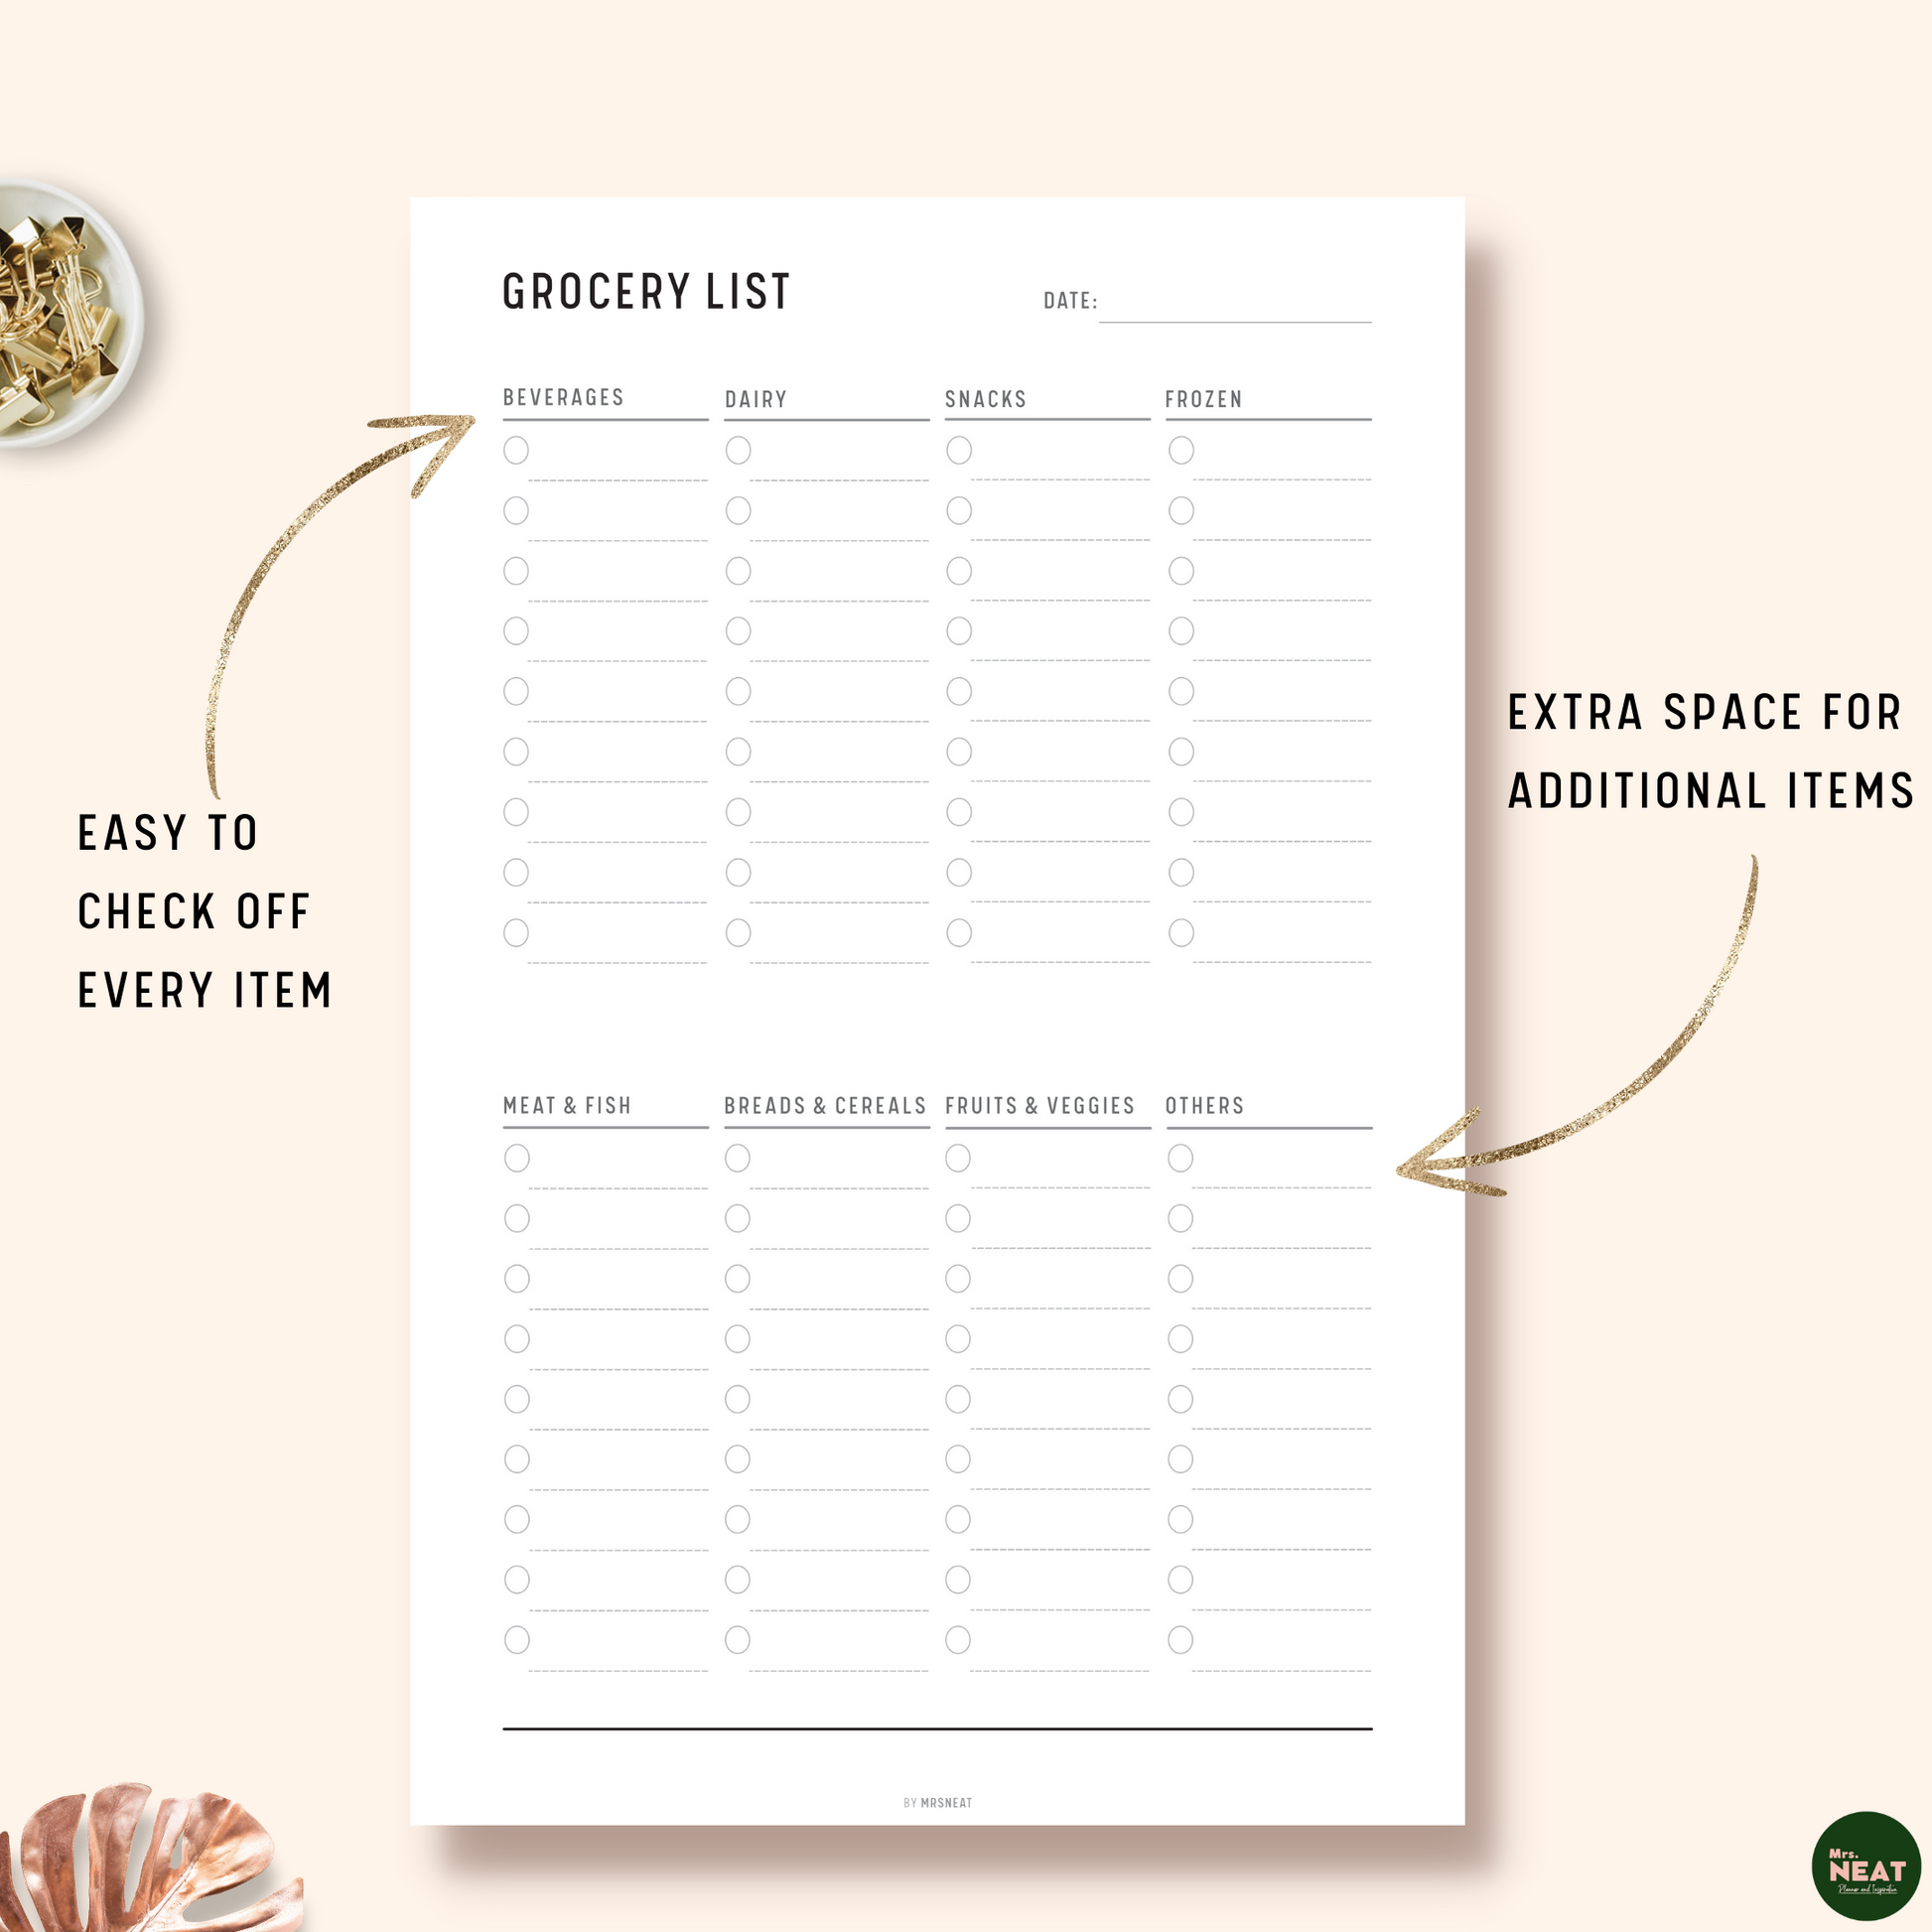 Minimalist Grocery List Planner with 8 shopping categories and checklist box for each category